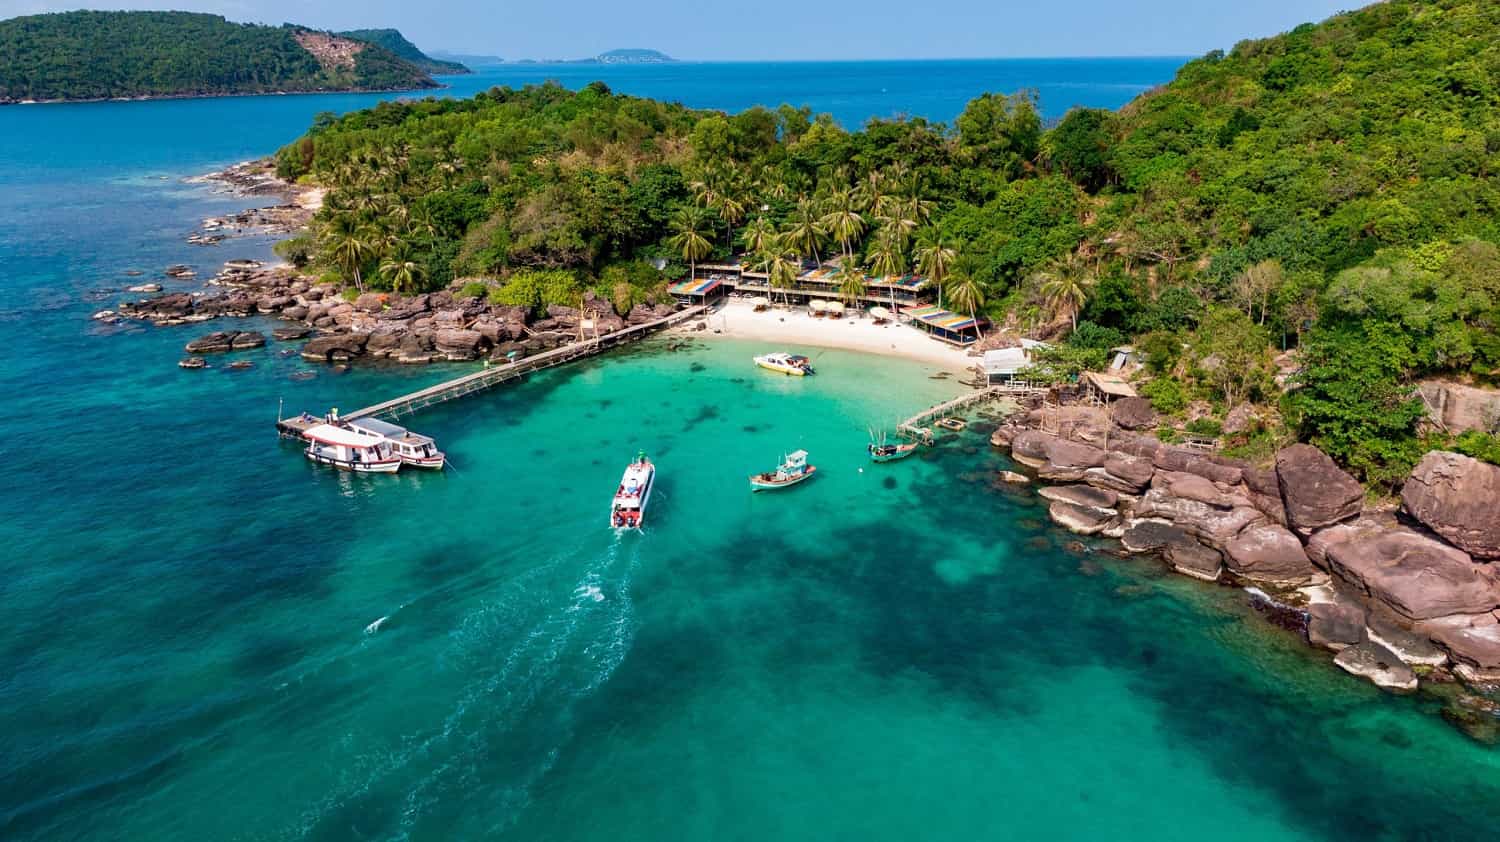 Phu Quoc Island - the 'Golden Forests and Silver Seas' Island of Vietnam